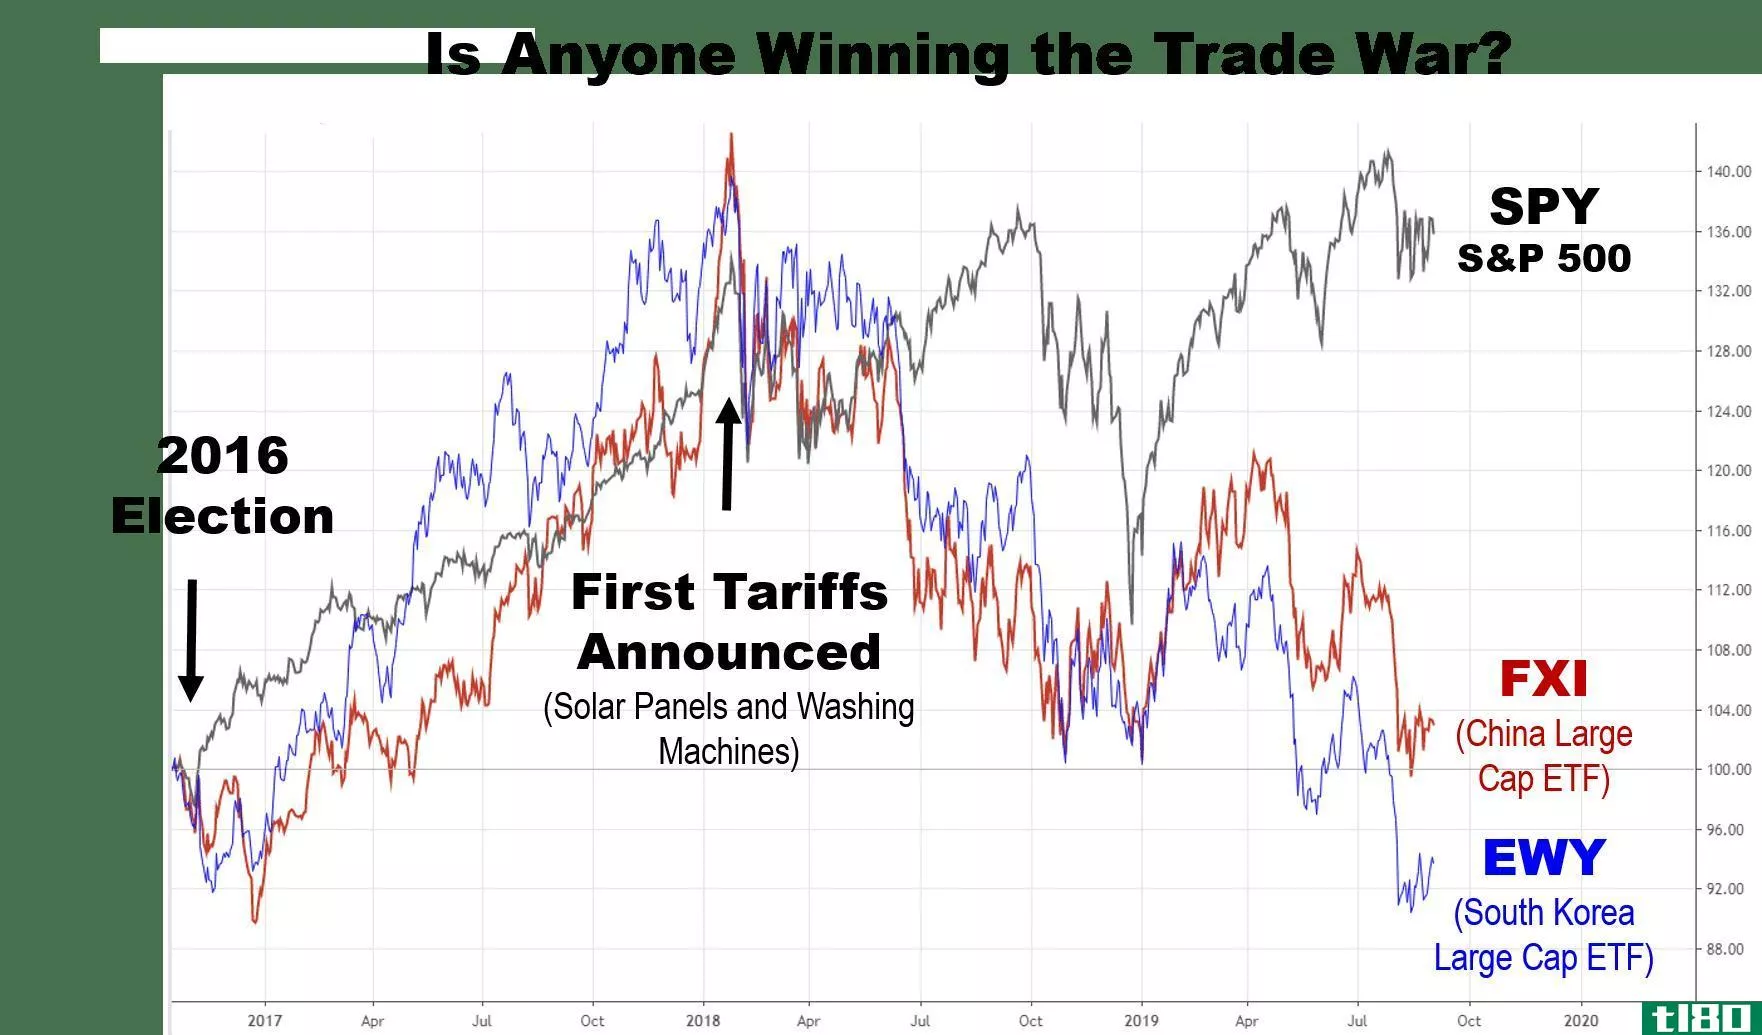 Chart showing performance of stocks affected by trade war